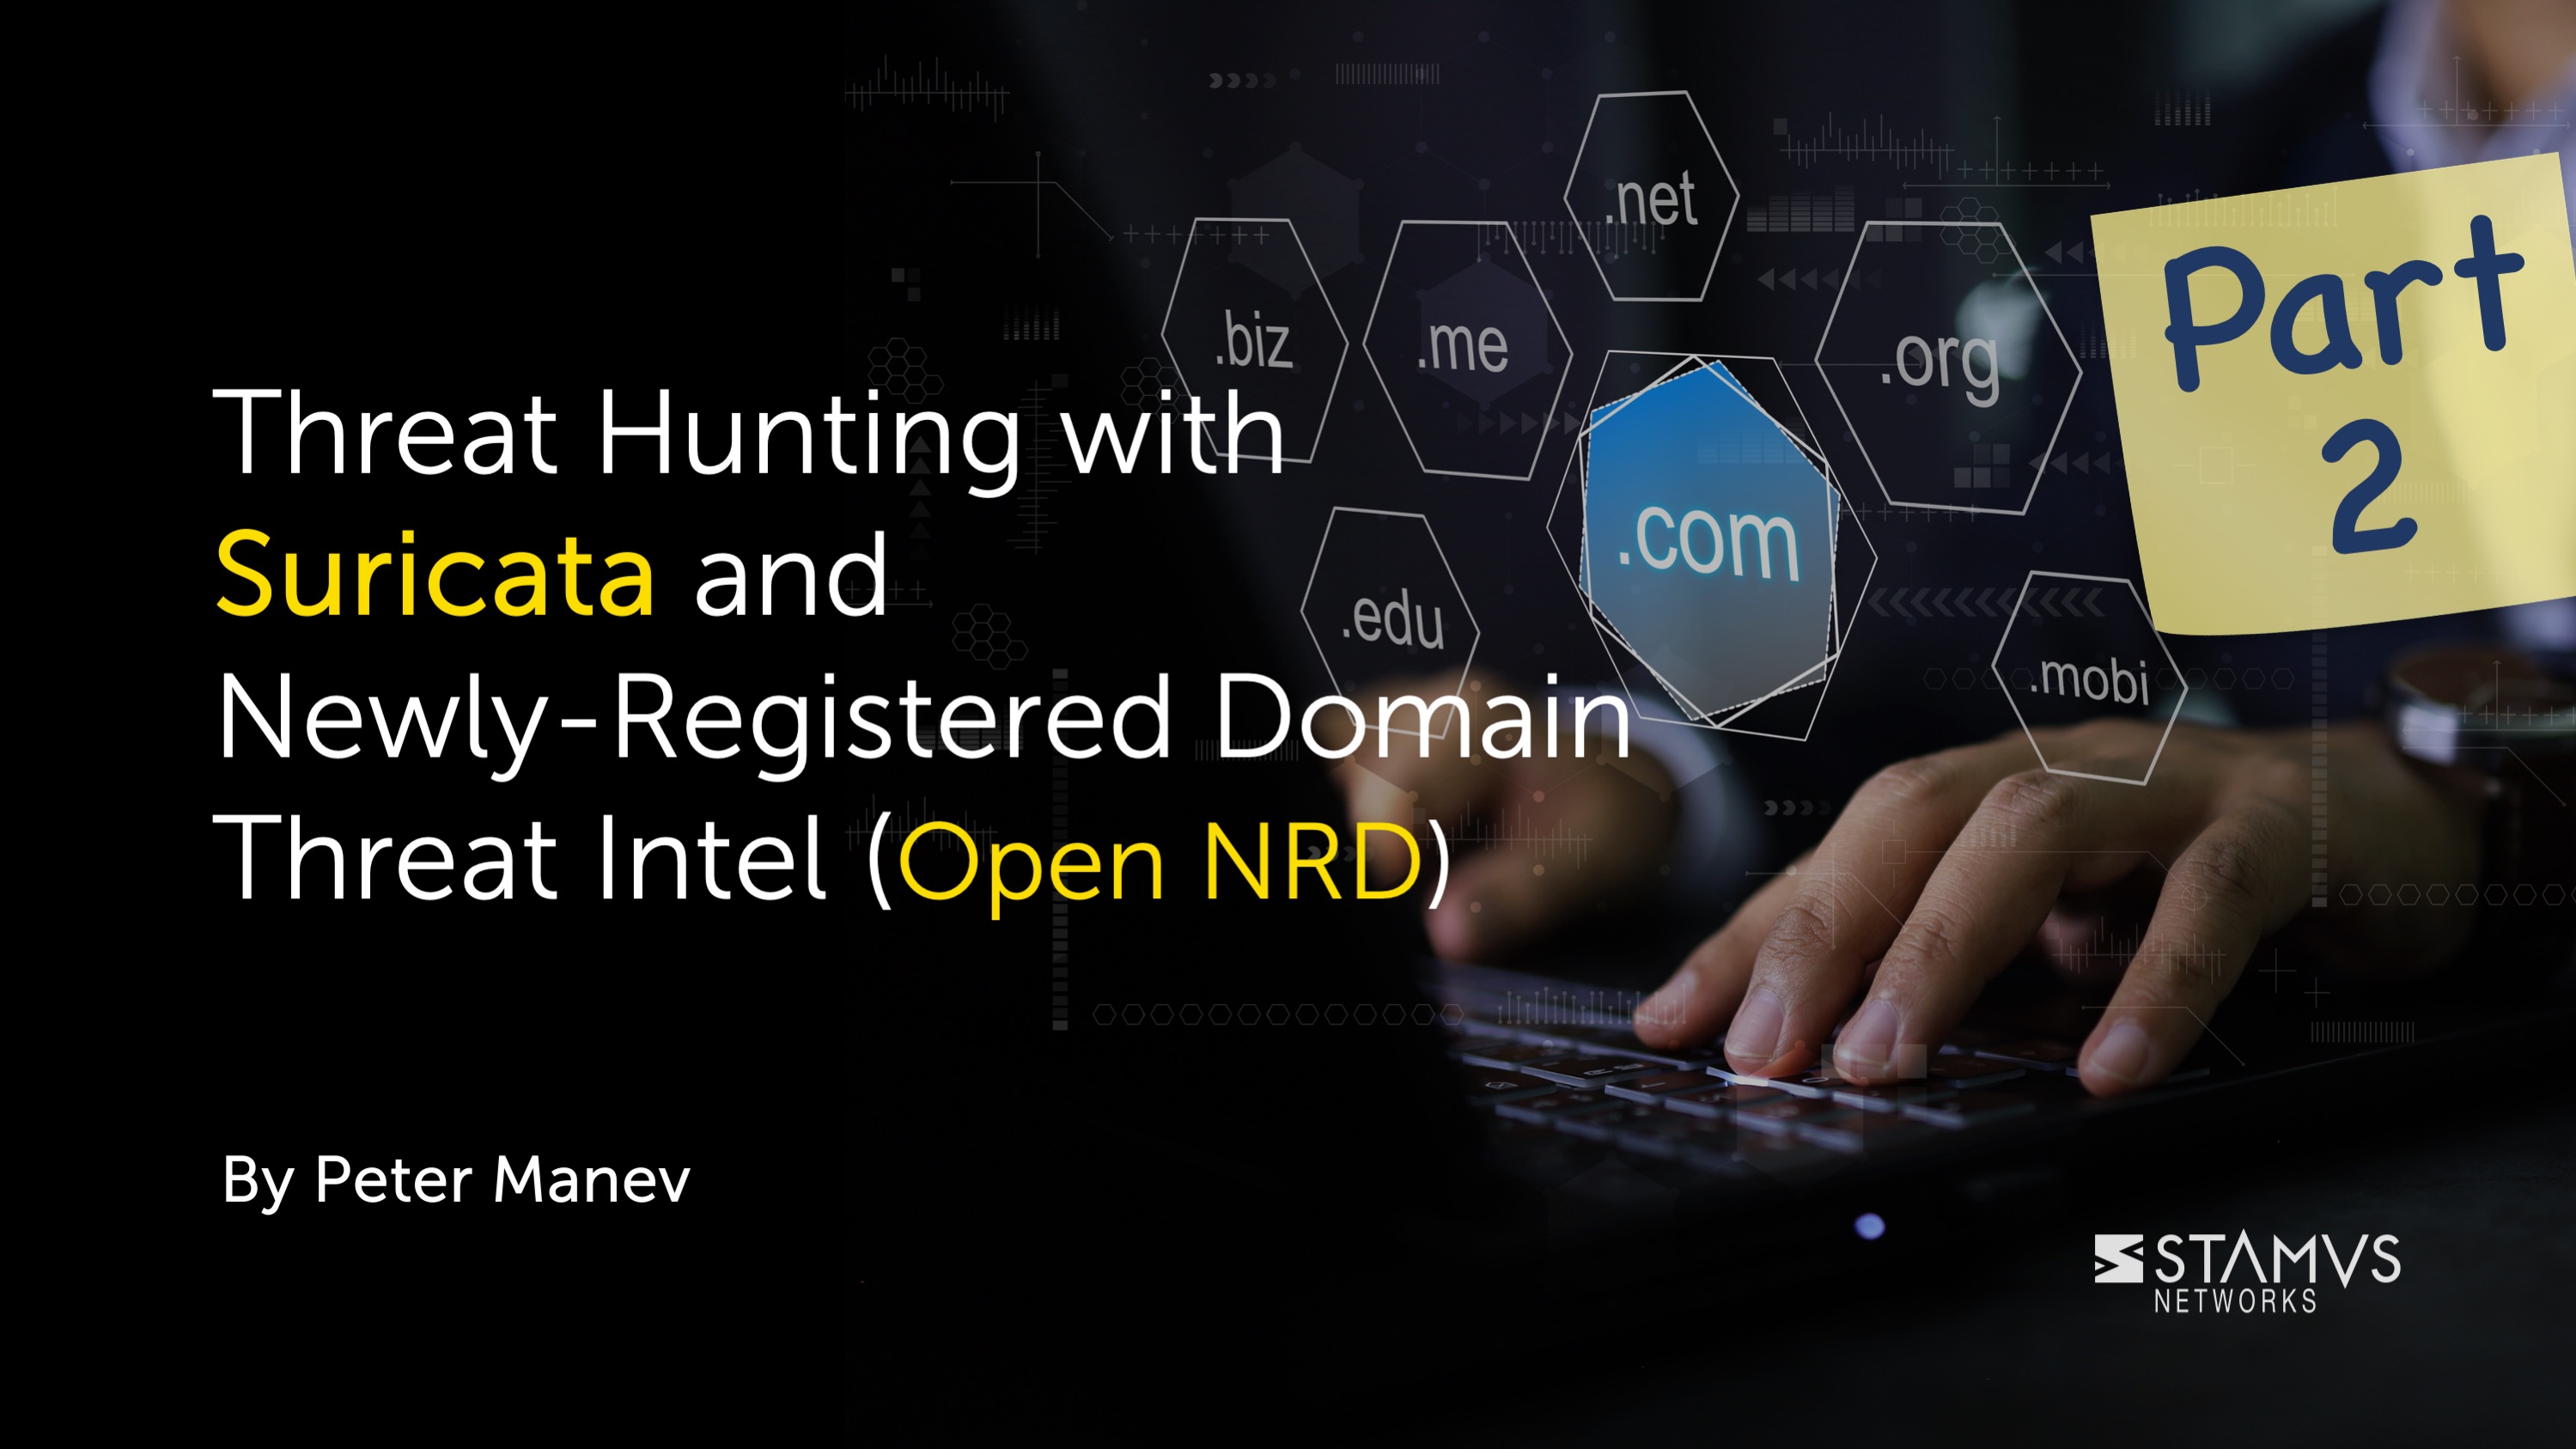 Threat Hunting with Suricata and Newly Registered Domain Threat Intel (Open NRD) Part 2